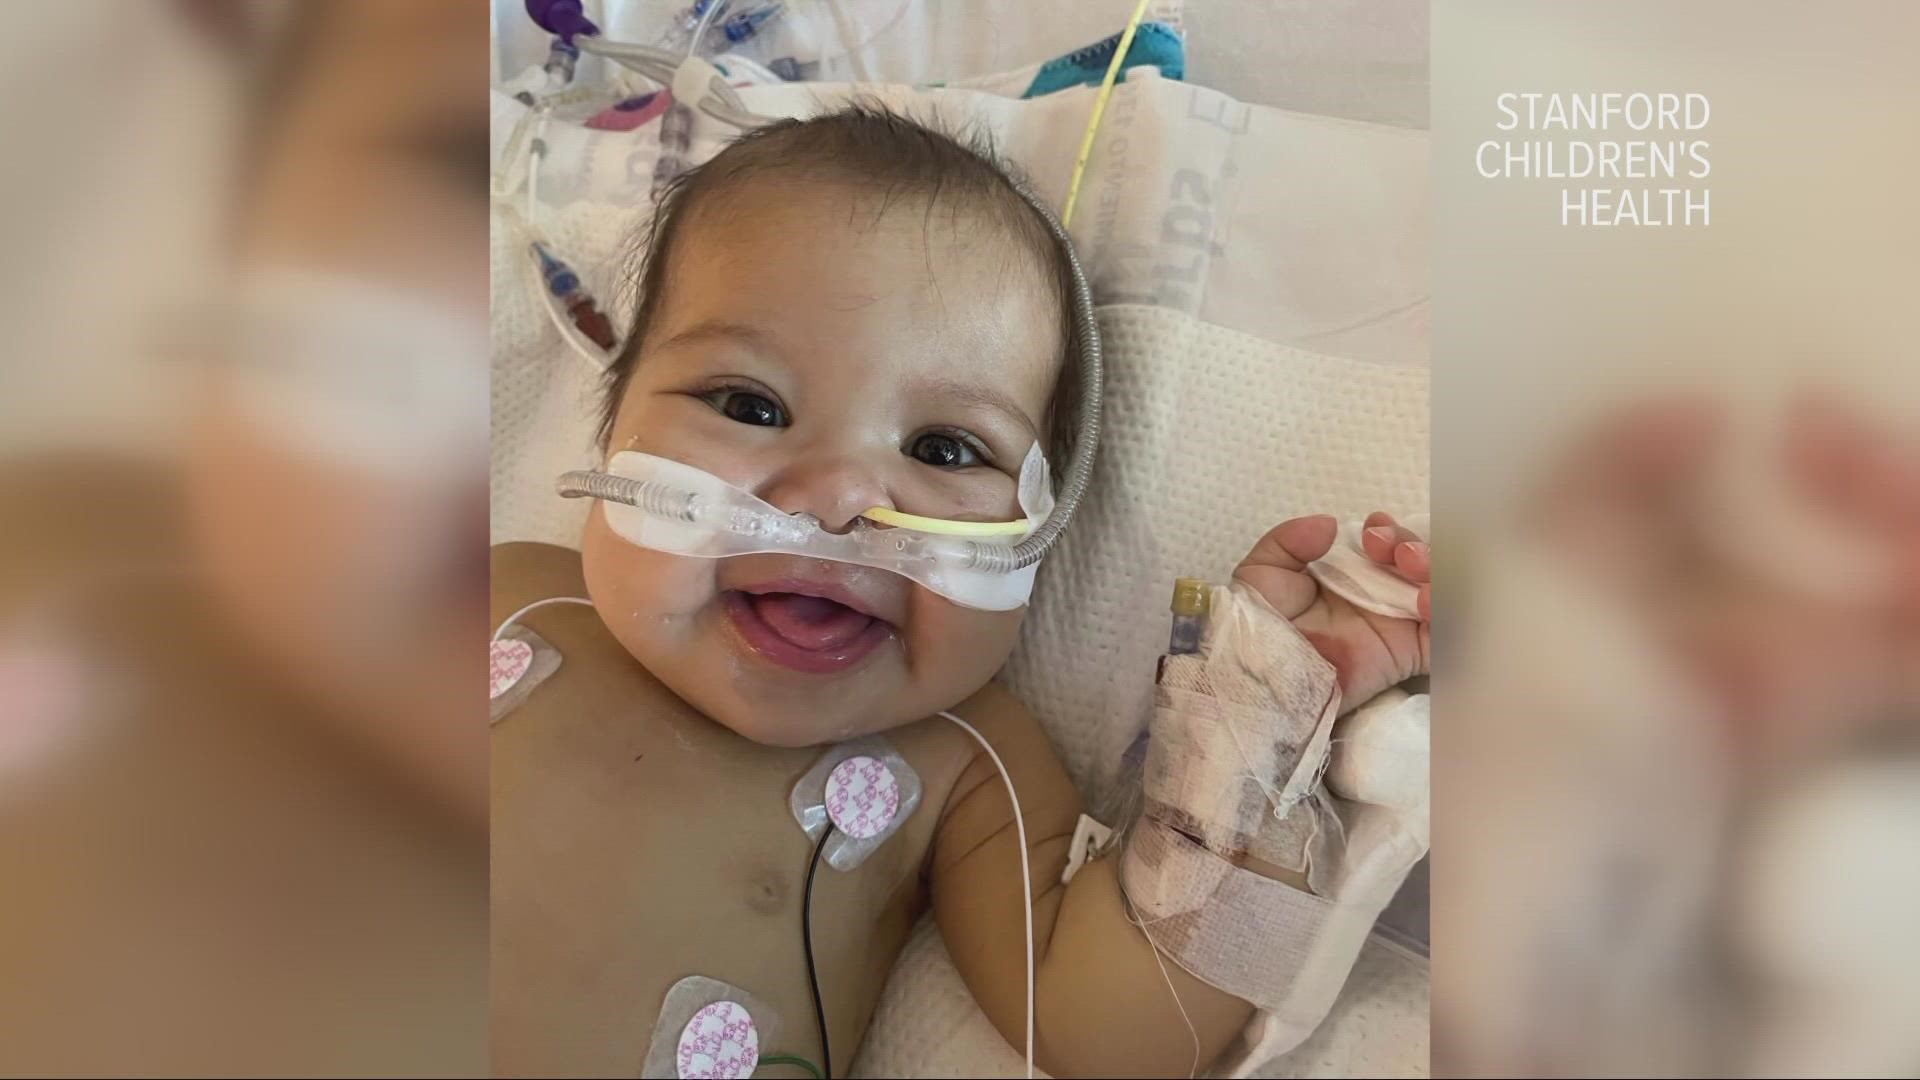 More than 100,000 Americans are waiting for an organ transplant. A Granite Bay family was on that list and is urging others to consider donation.